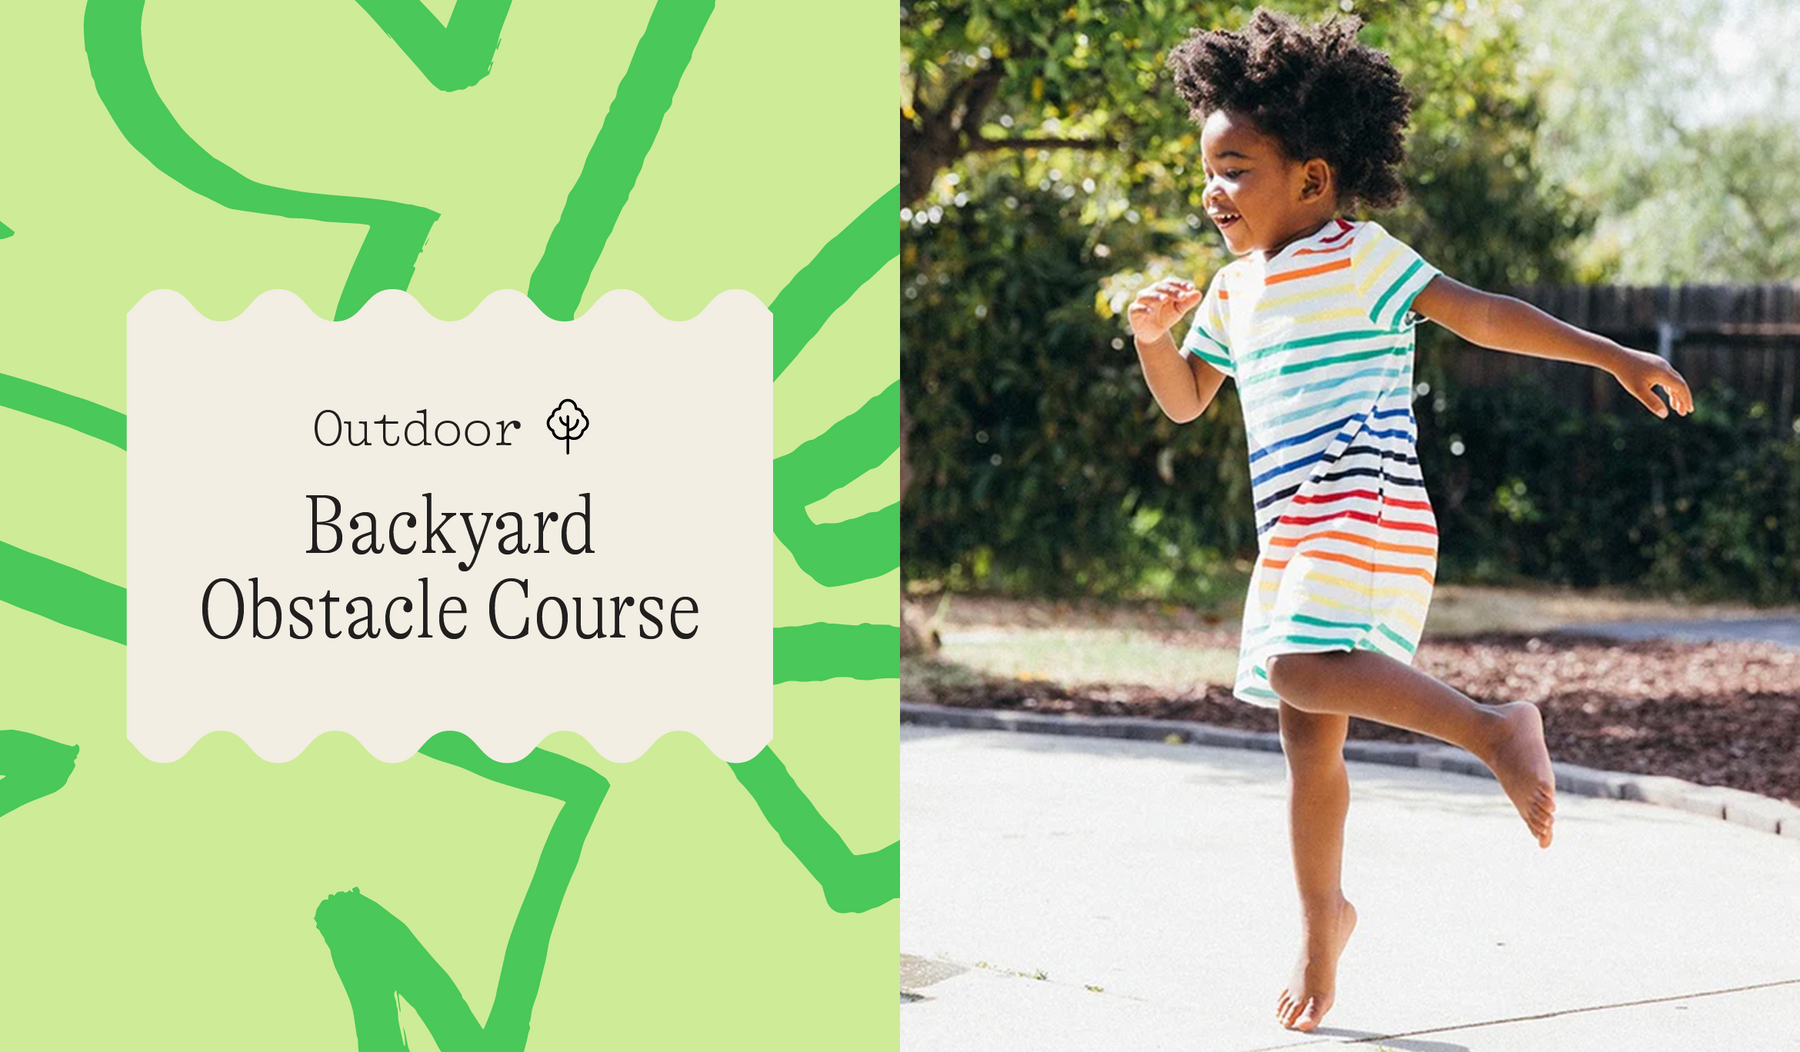 Primary Color Camp: DIY Backyard Obstacle Course